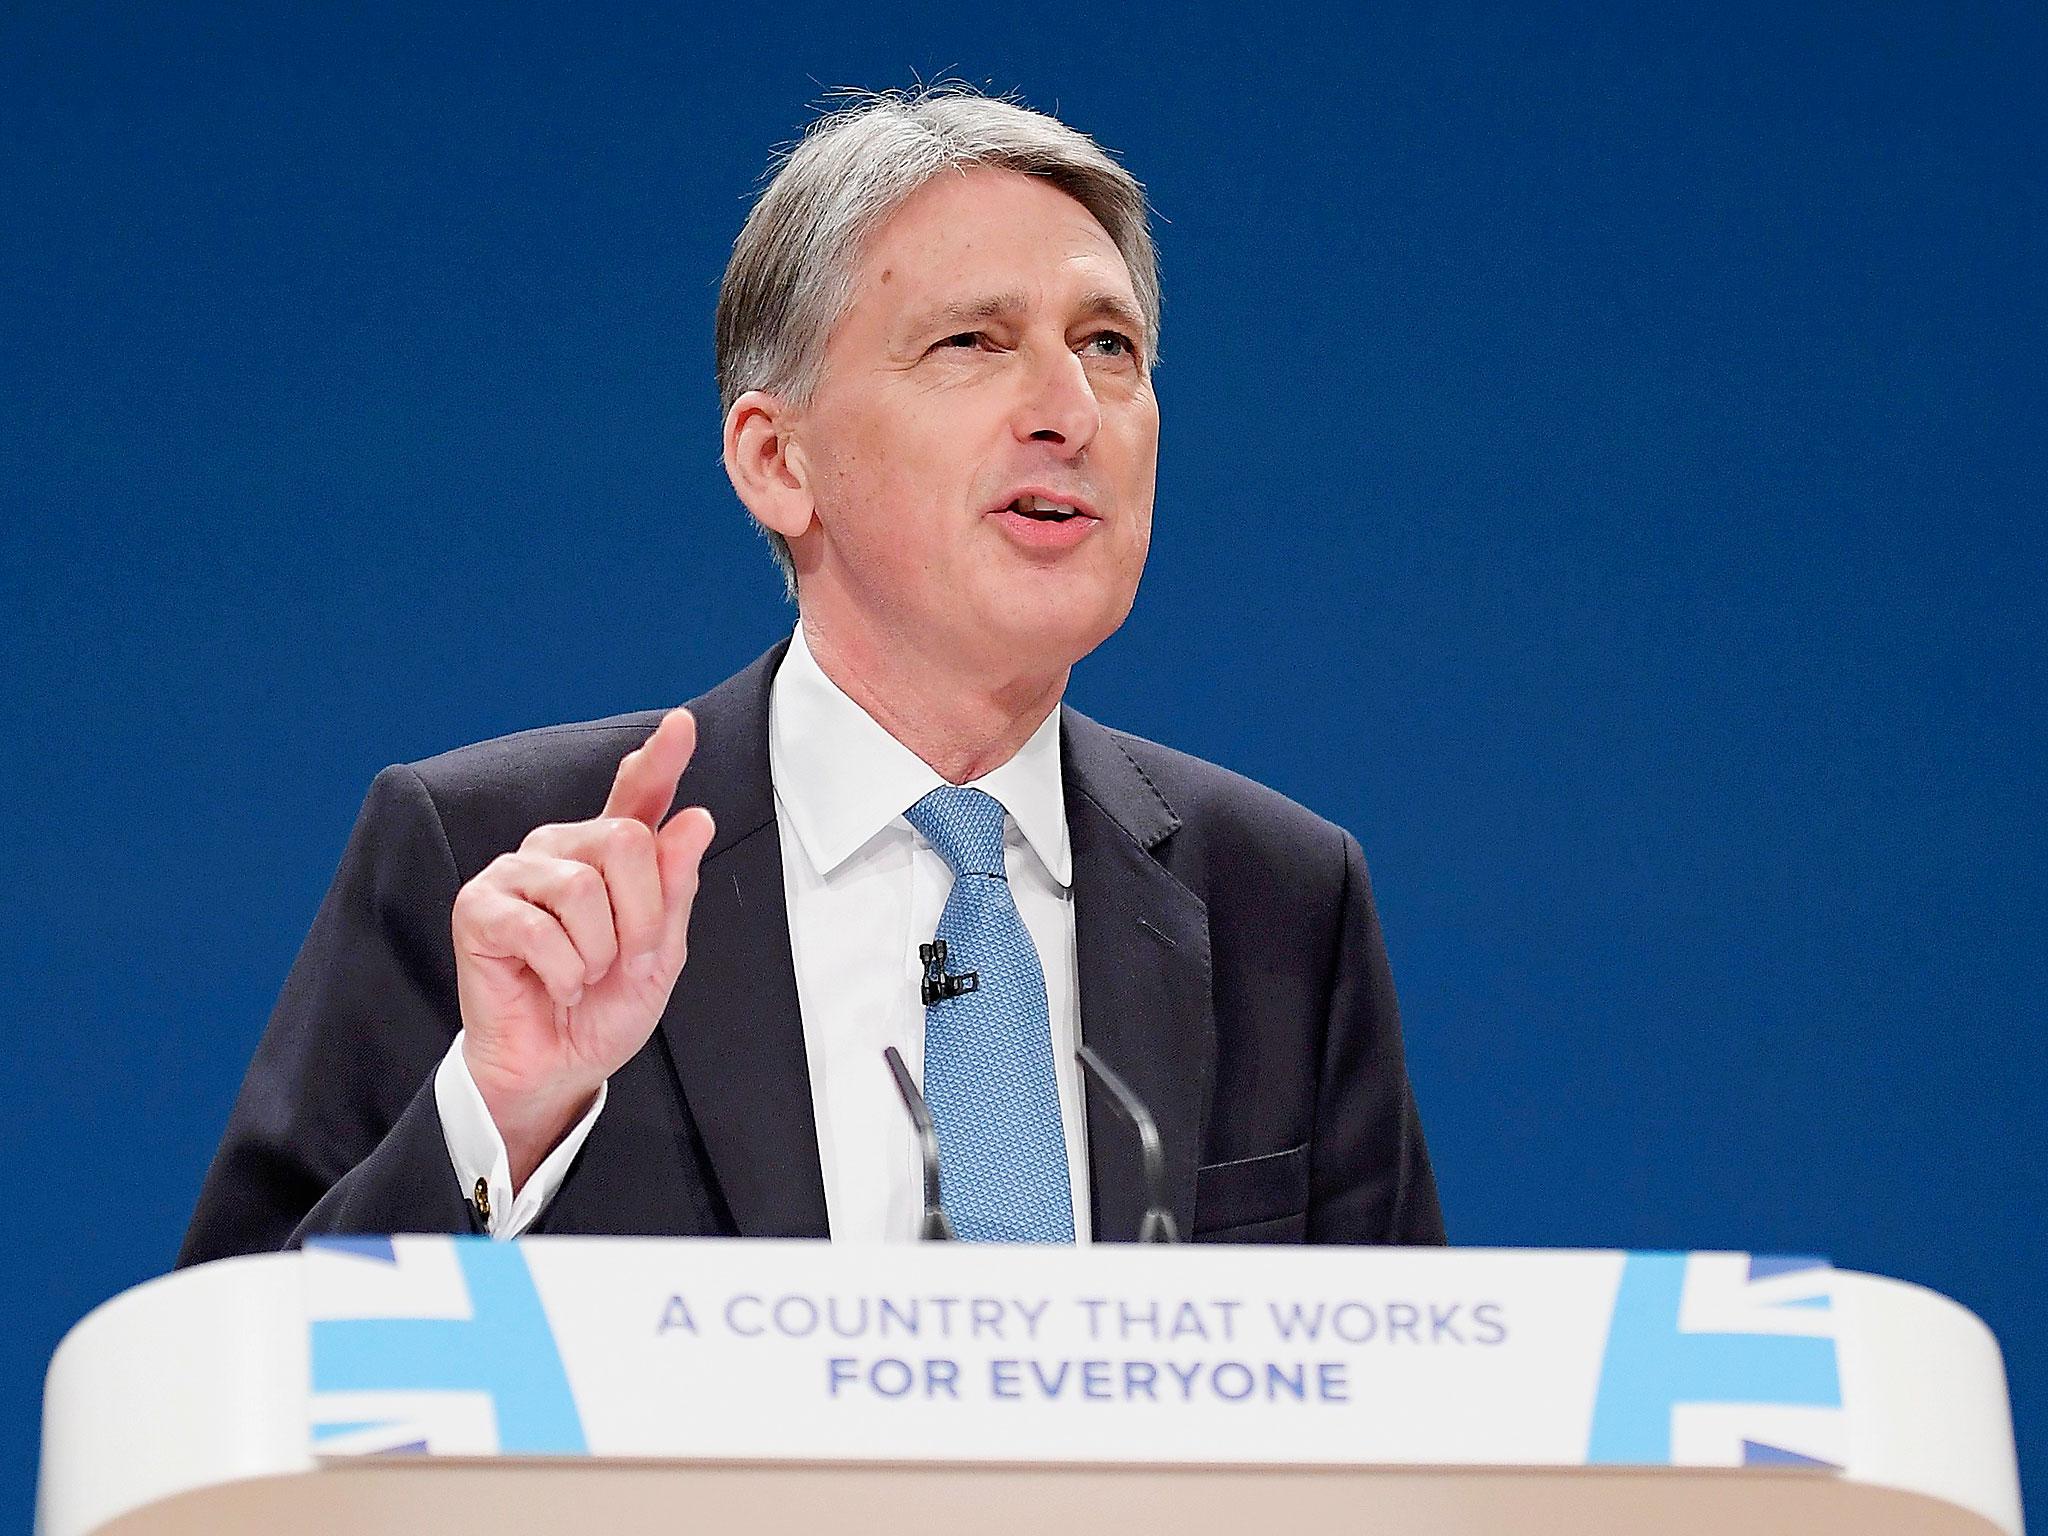 Chancellor of the Exchequer Philip Hammond speaks at the Conservative Party conference in Birmingham